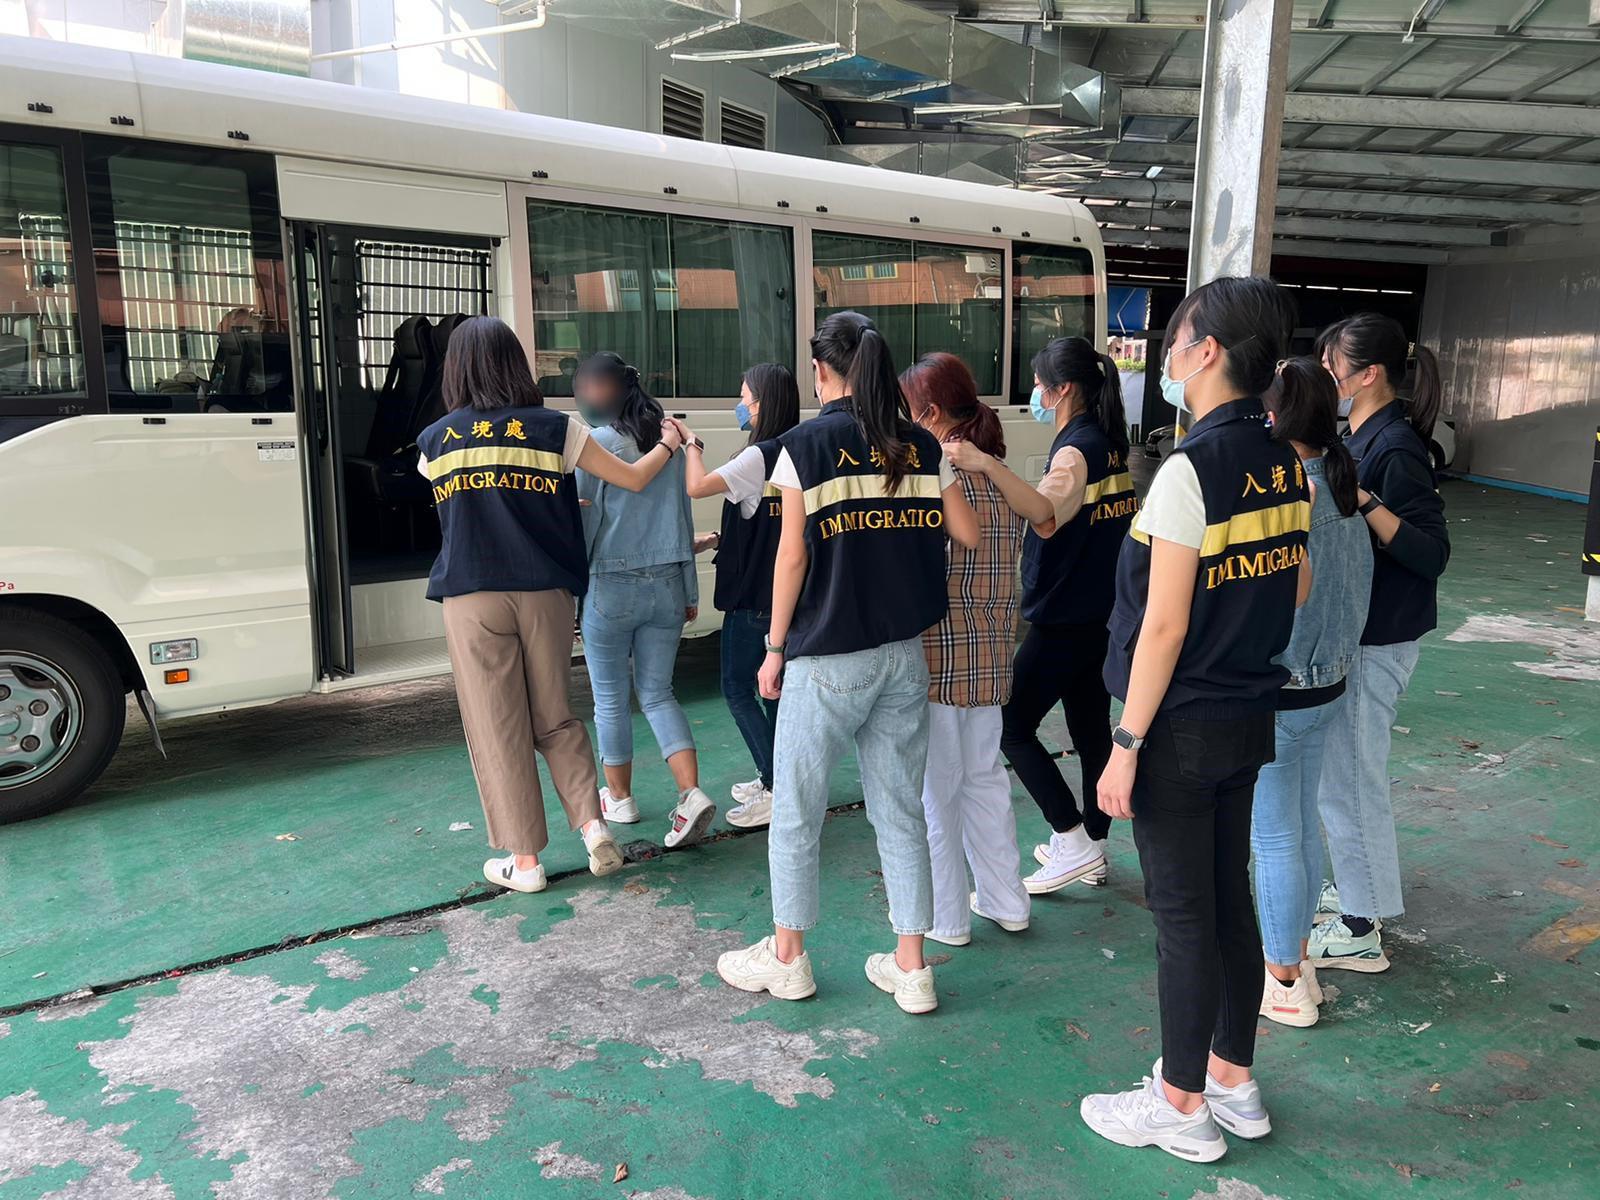 The Immigration Department mounted a series of territory-wide anti-illegal worker operations codenamed "Lightshadow" and "Twilight" on April 6 and yesterday (April 7). Photo shows suspected illegal workers arrested during the operations.